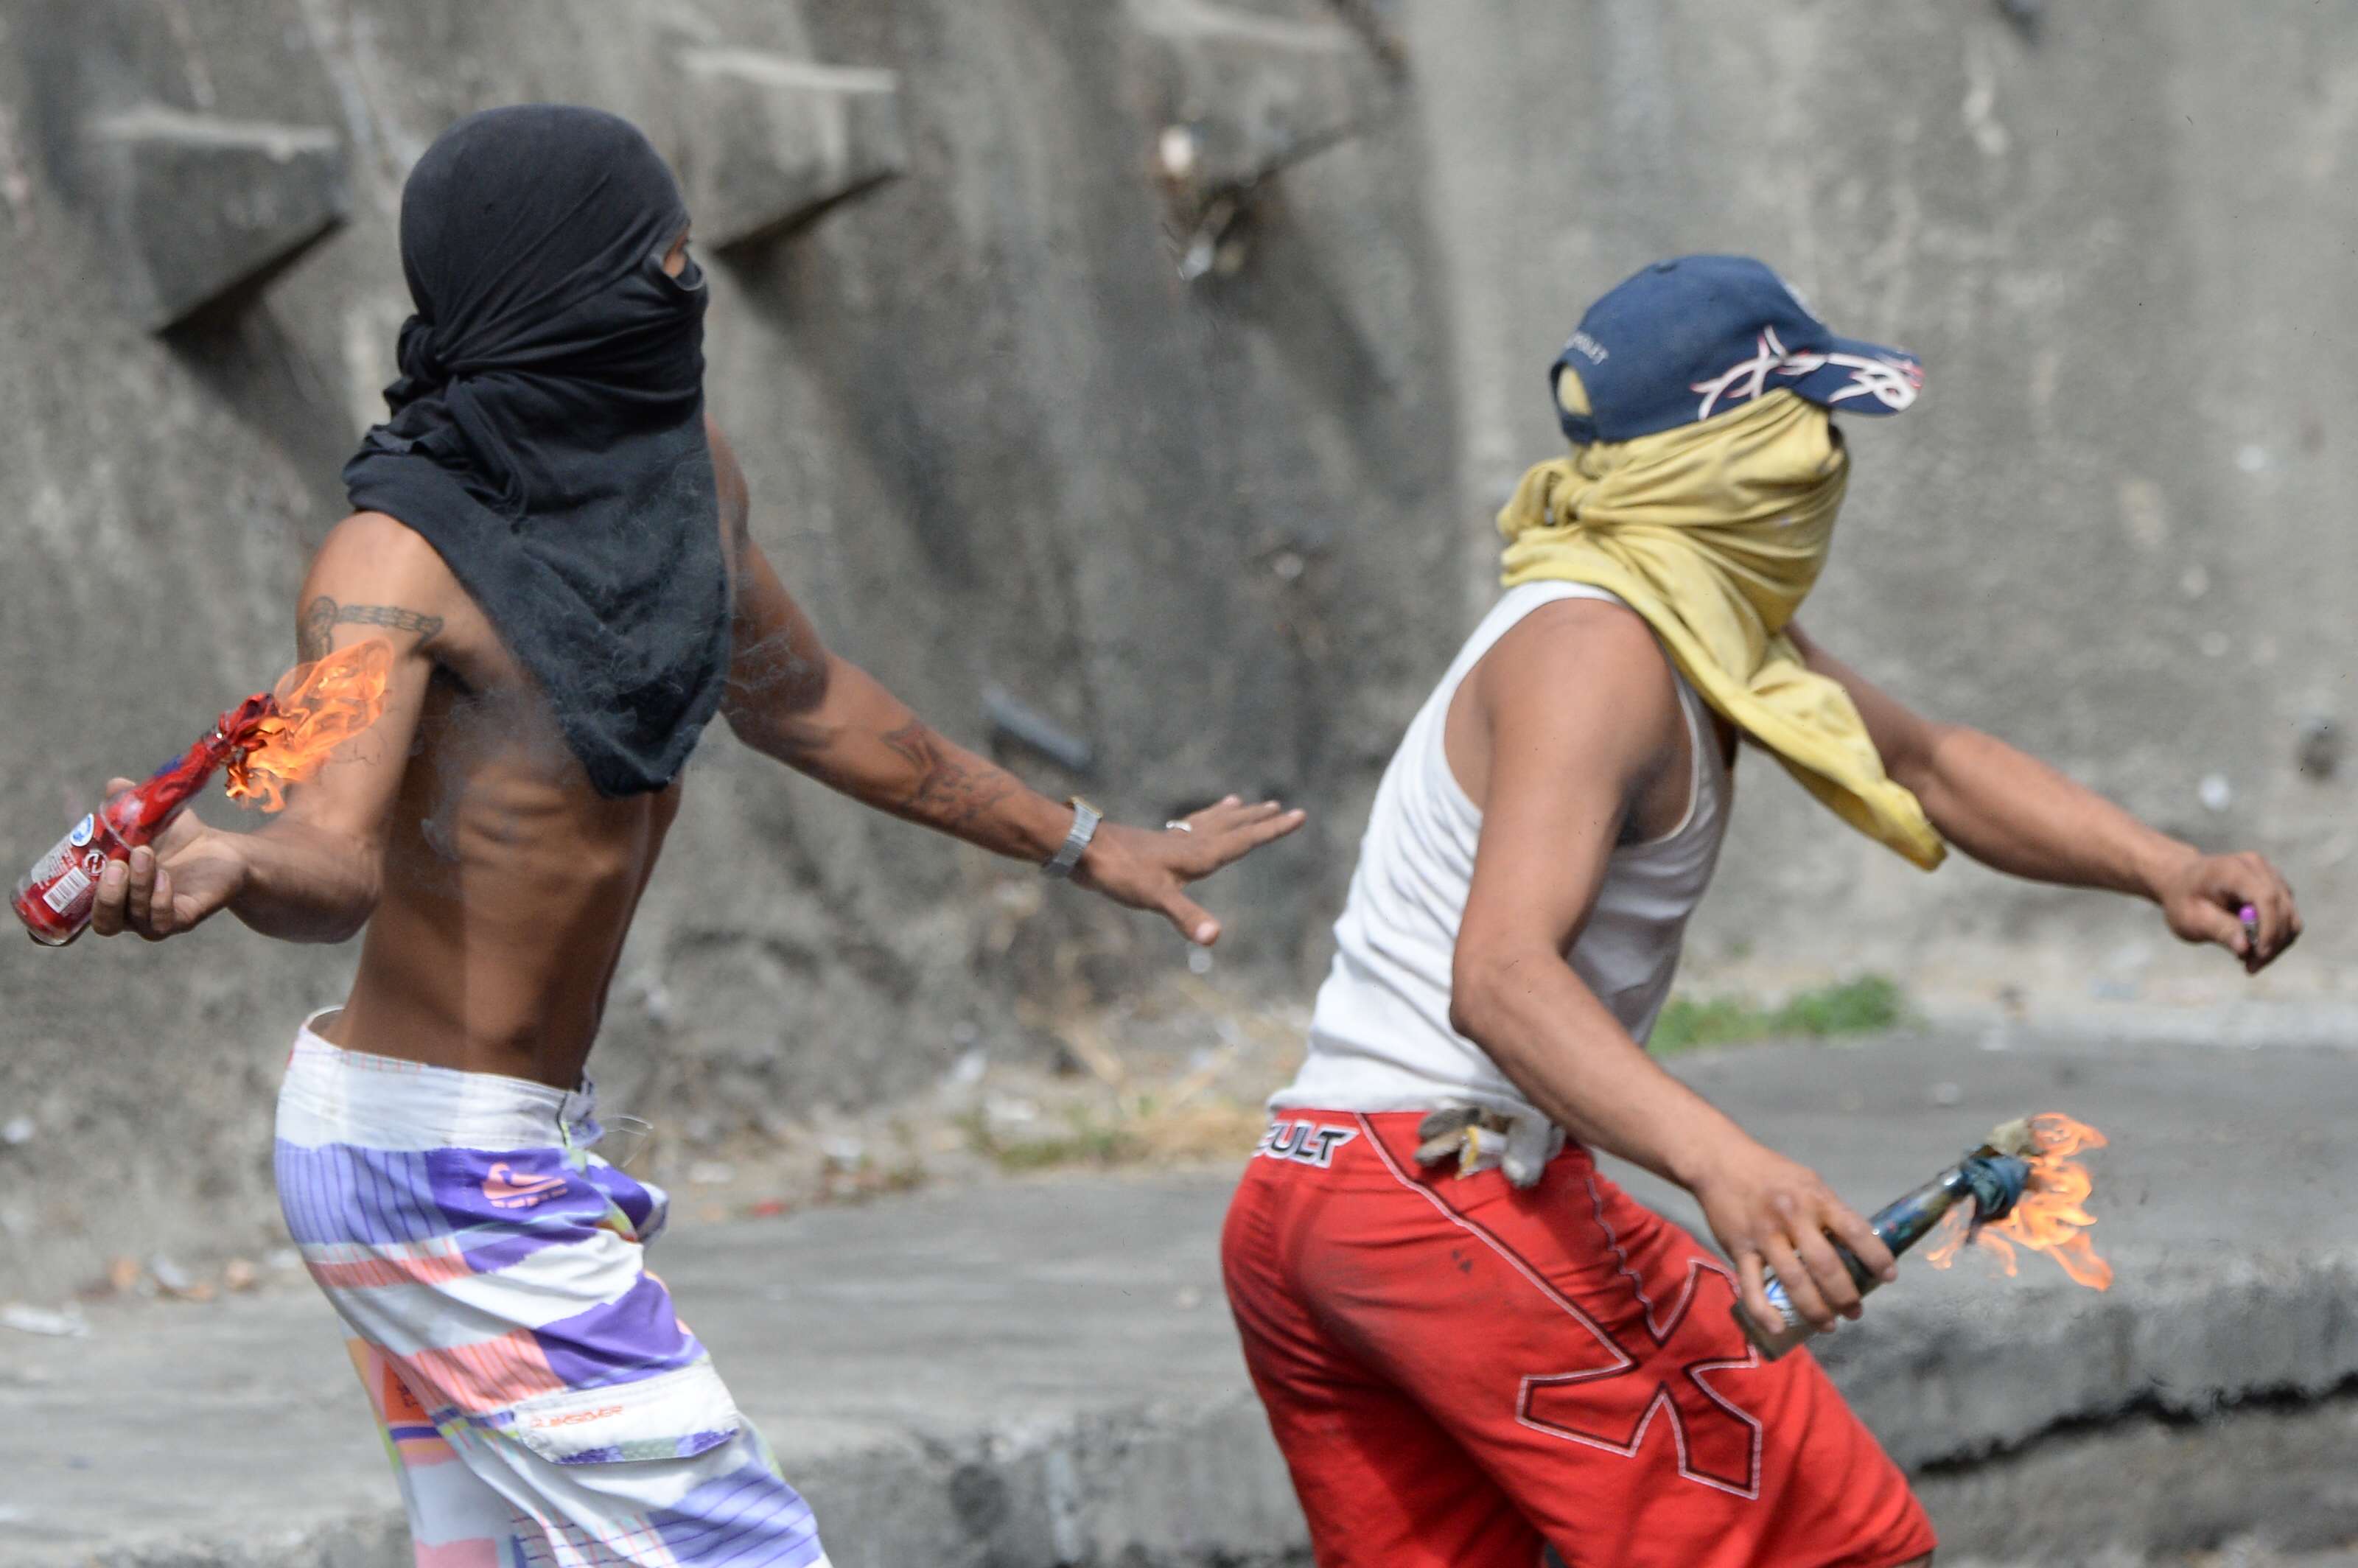 Anti-government demonstrators throw Molotov cocktails during clashes with police and troops in the surroundings of a National Guard command post in Cotiza, in northern Caracas, on January 21, 2019. - A group of soldiers rose up against Venezuela's President Nicolas Maduro at a command post in northern Caracas on Monday, but were quickly arrested after posting an appeal for public support in a video, the government said. (Photo by Federico PARRA / AFP) (Photo credit should read FEDERICO PARRA/AFP/Getty Images)